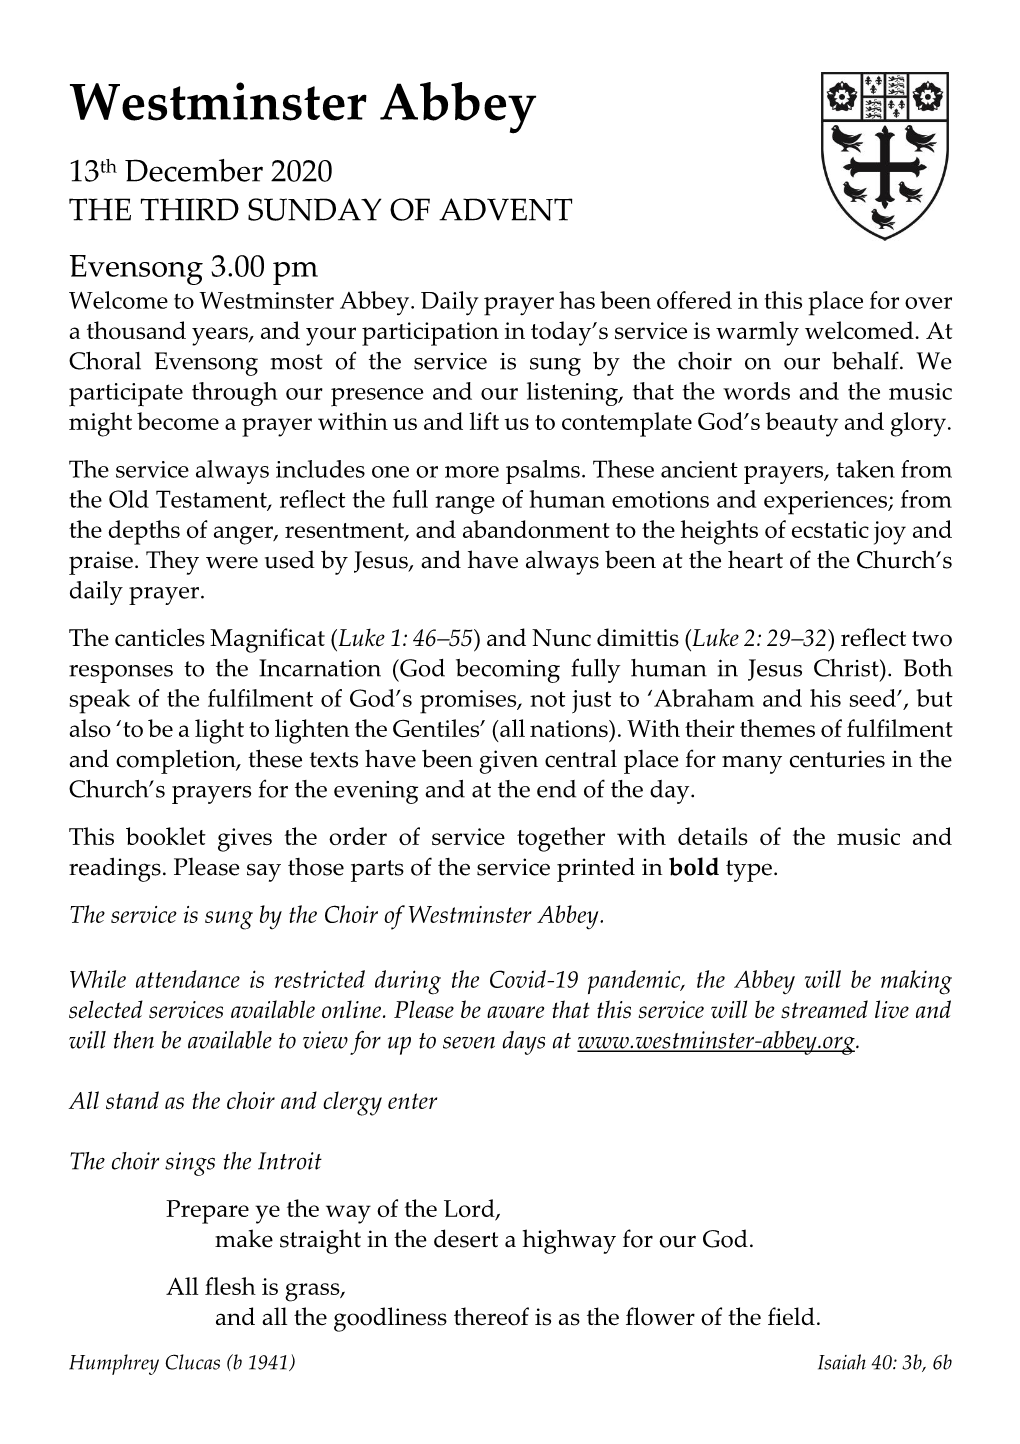 Order of Service for Evensong, 13Th December 2020